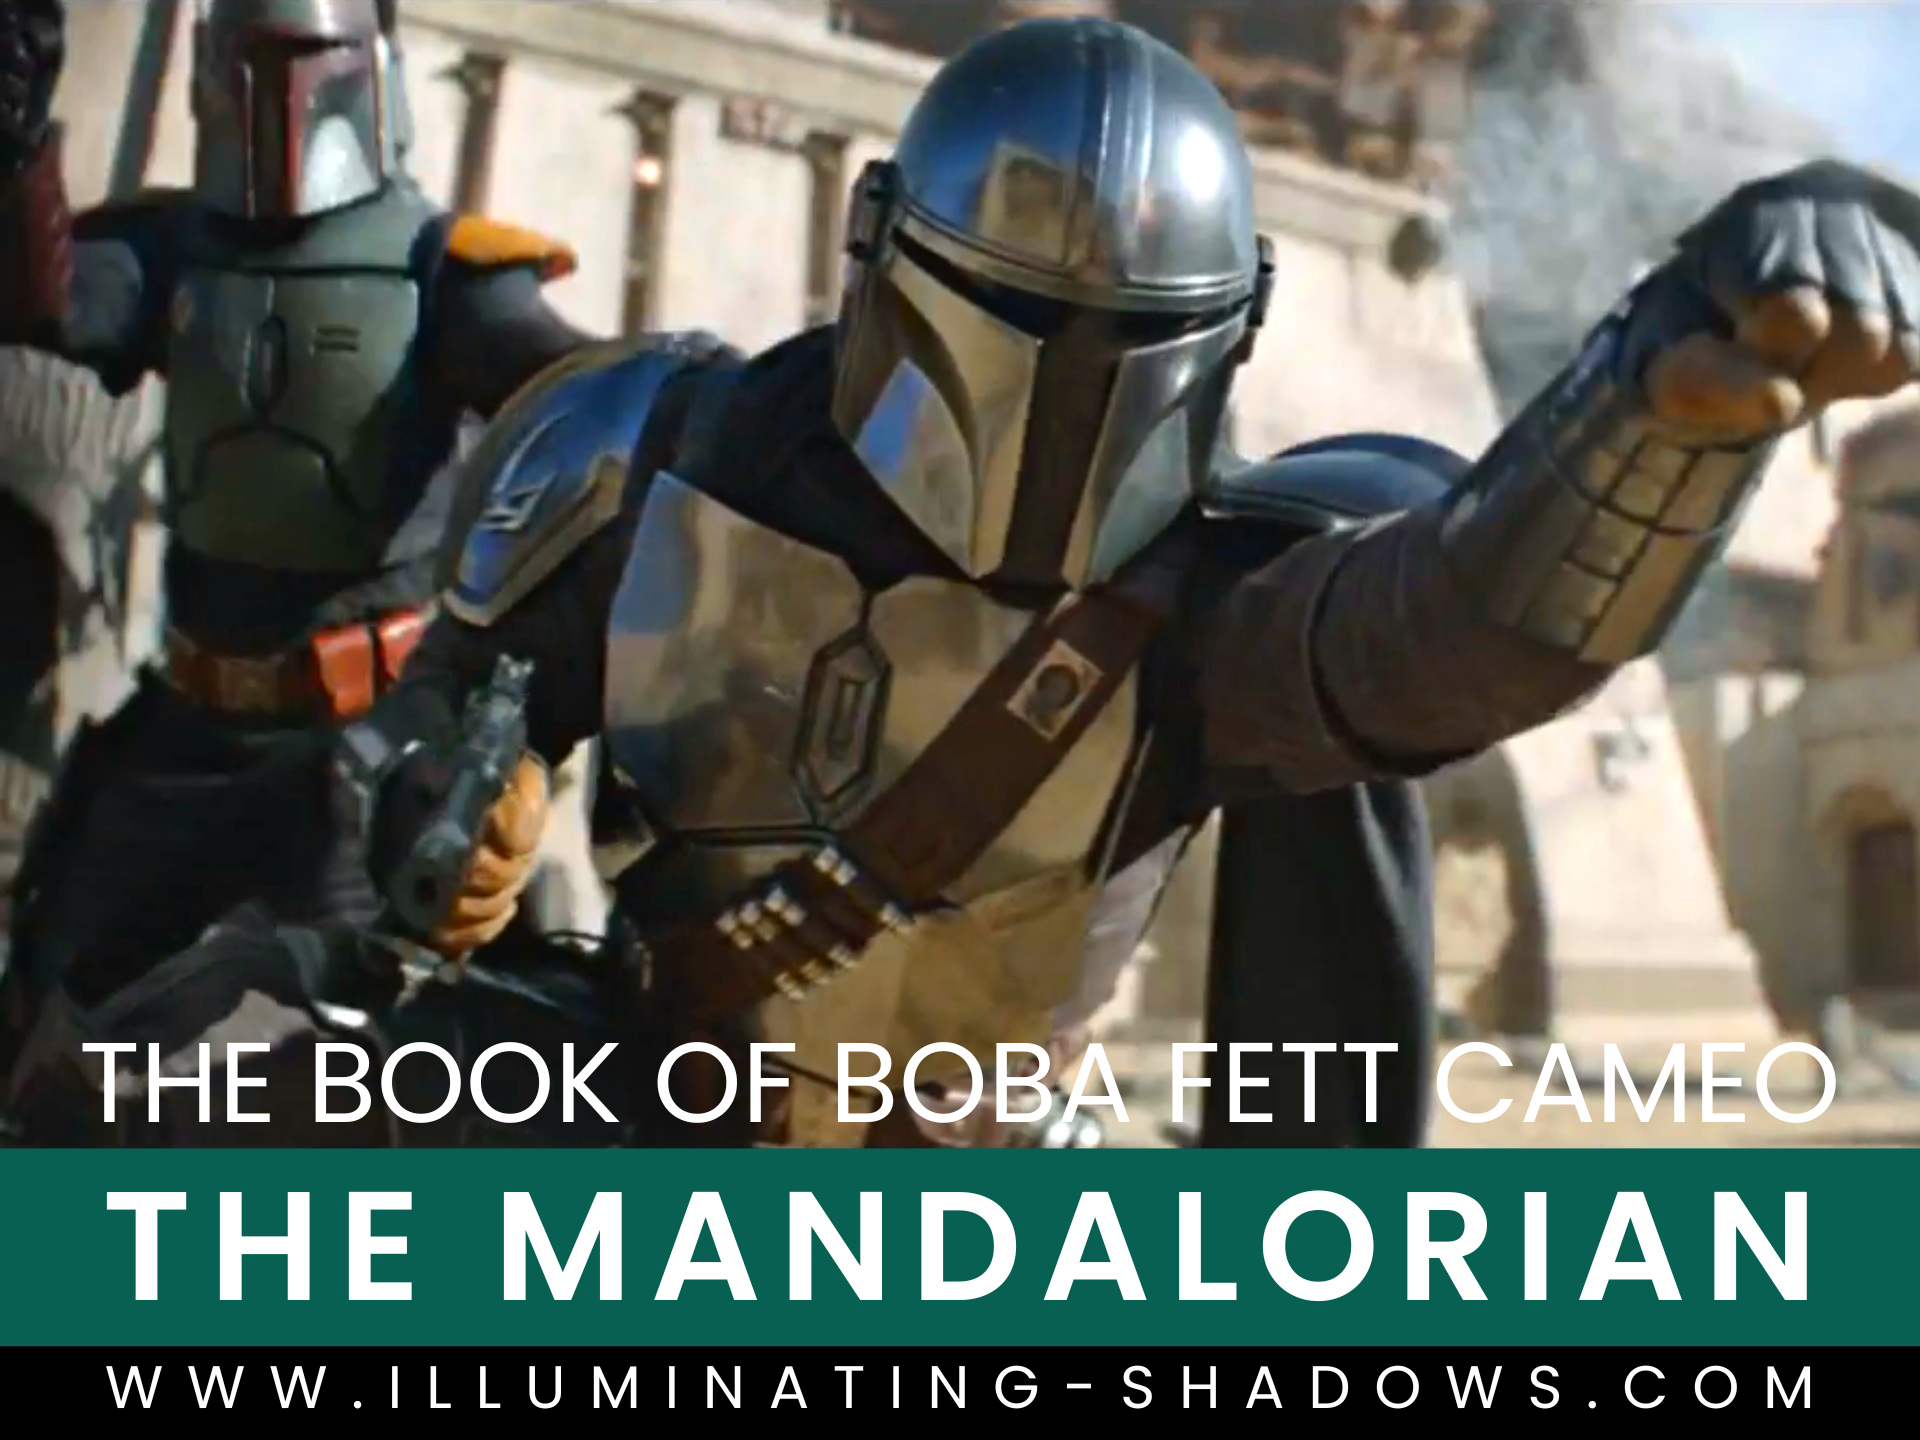 The Mandalorian Cameo in The Book of Boba Fett - Picture of Din Djarin and Boba Fett